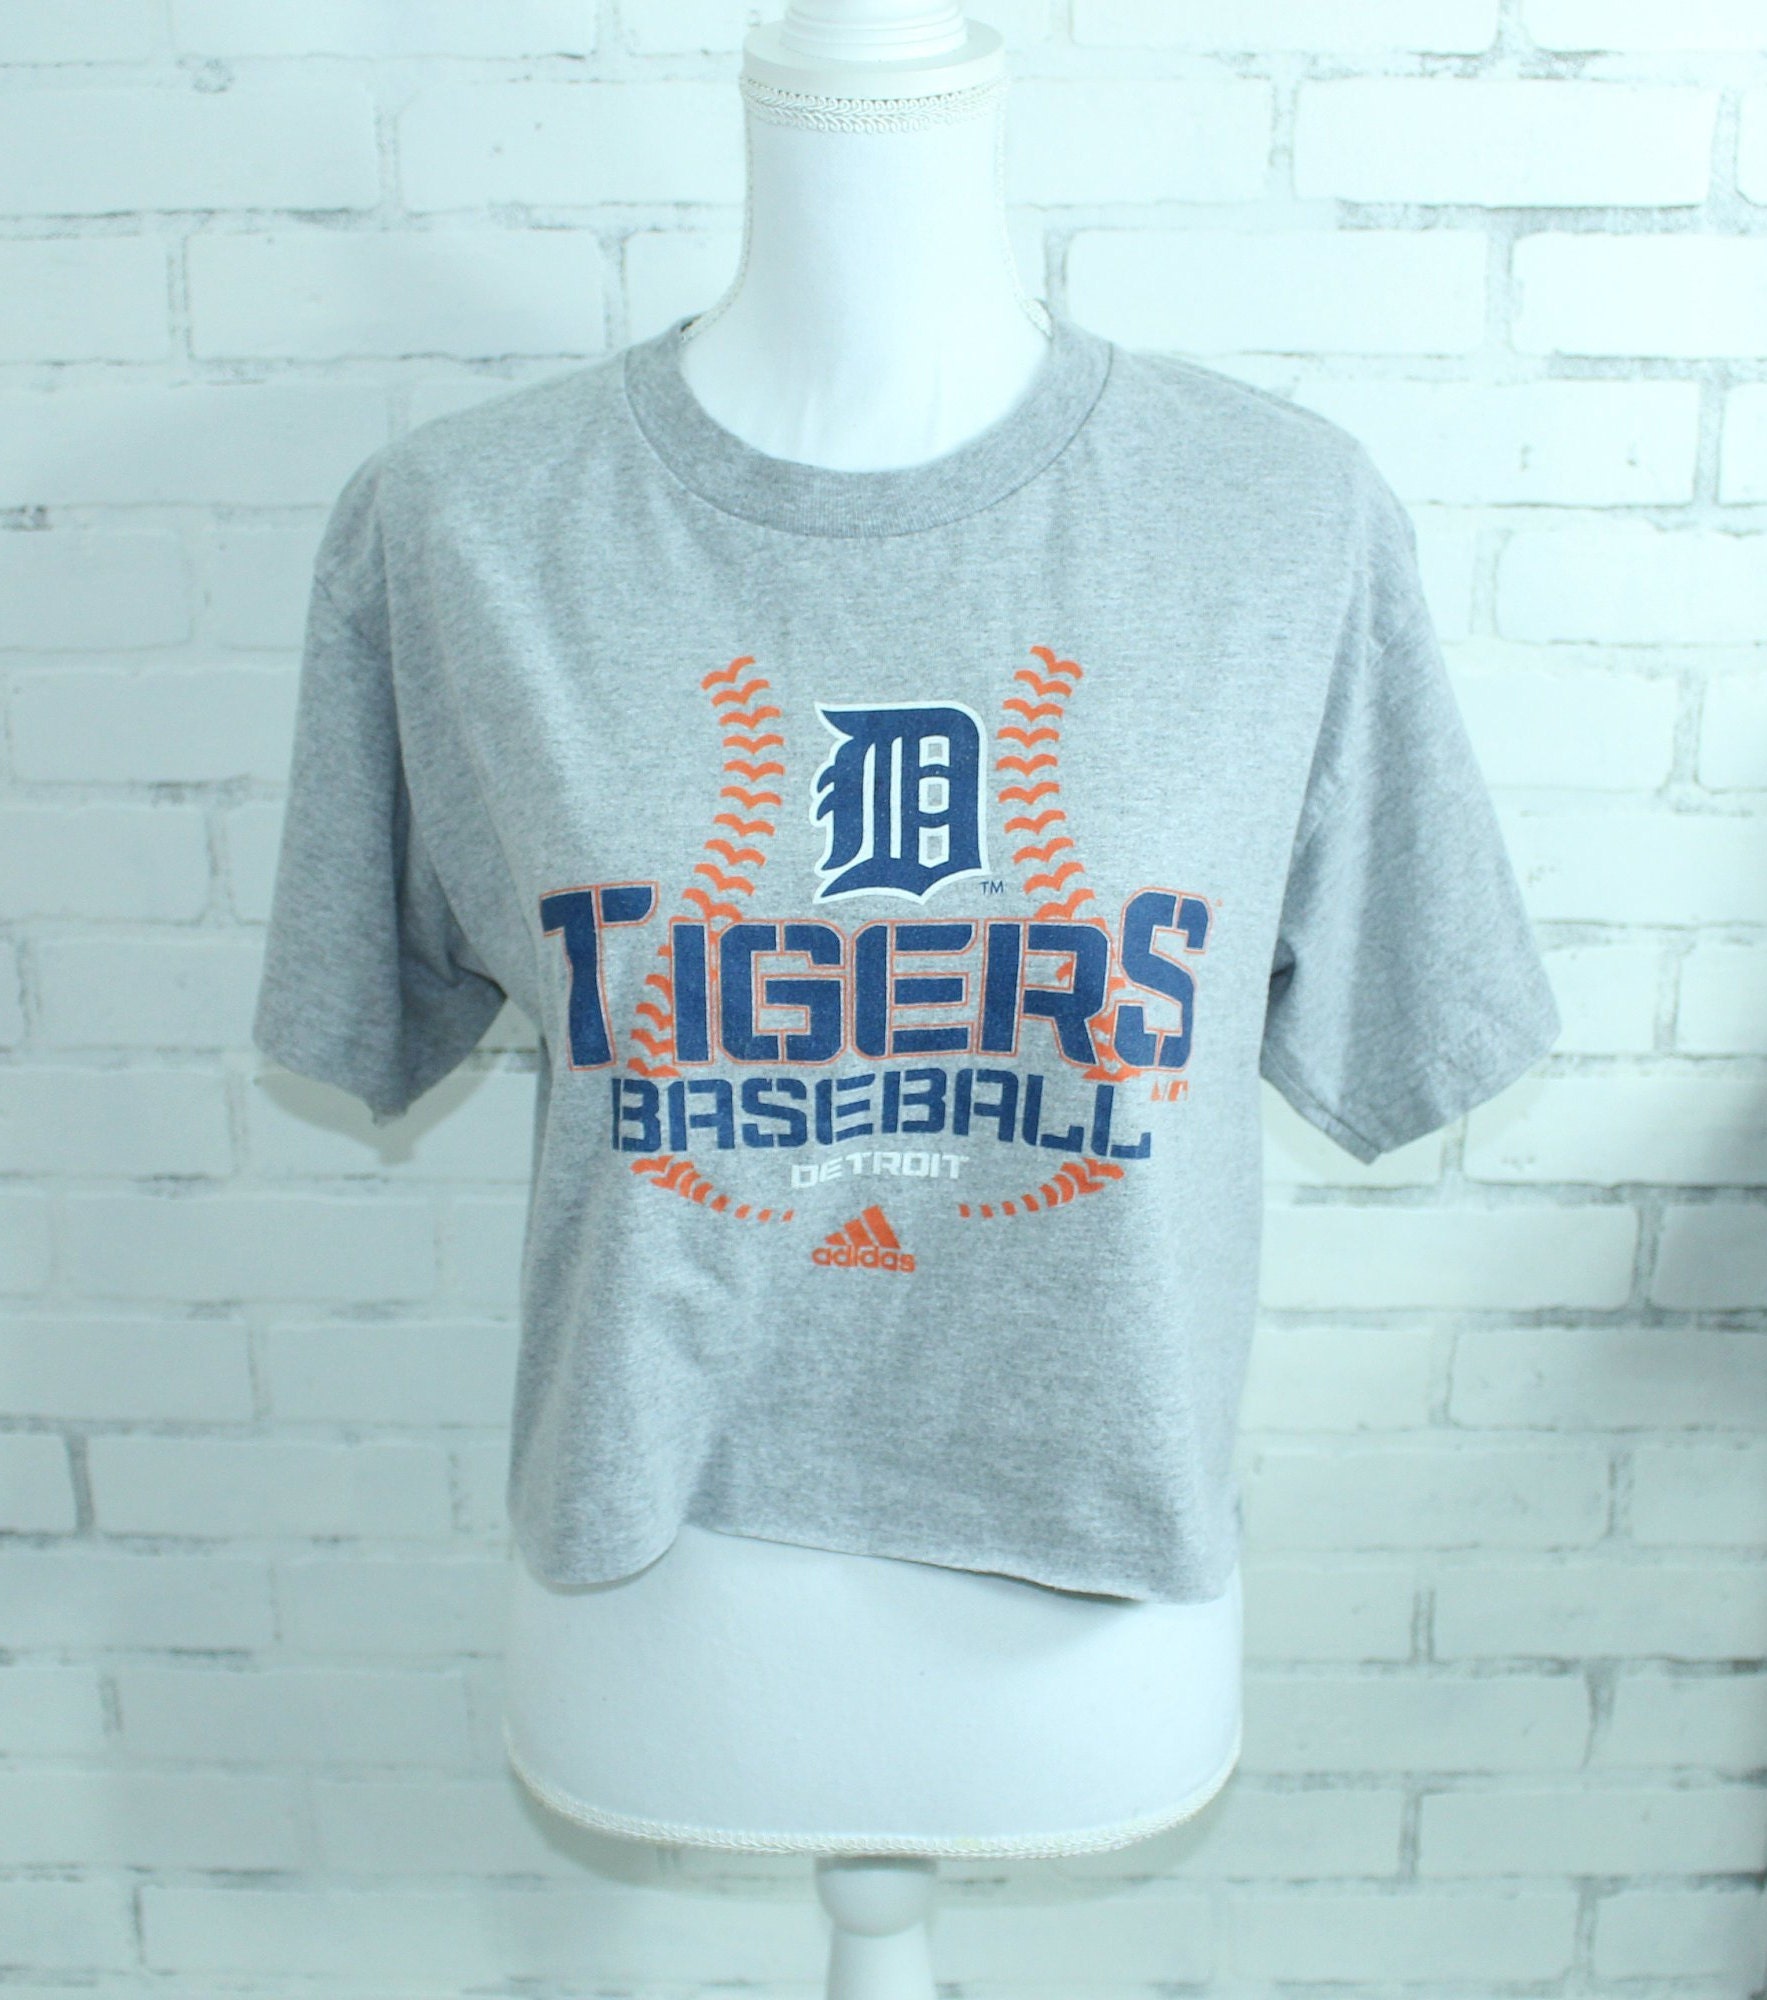 Detroit Tigers Baseball Vintage Graphic T-shirt RARE One of a 